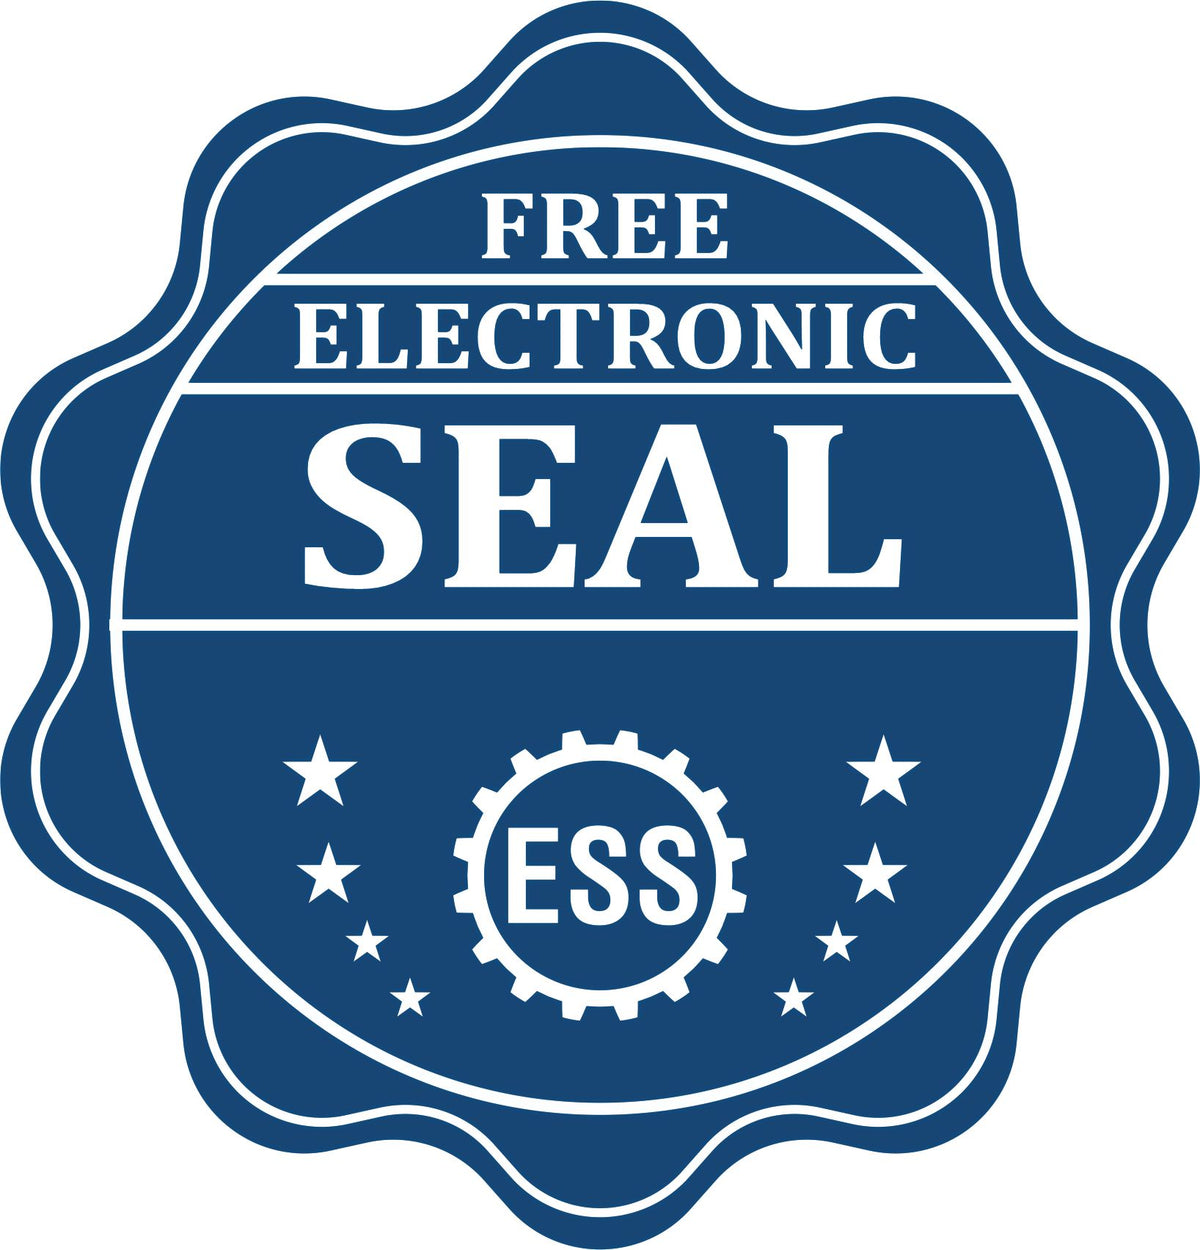 A badge showing a free electronic seal for the Hybrid District of Columbia Engineer Seal with stars and the ESS gear on the emblem.